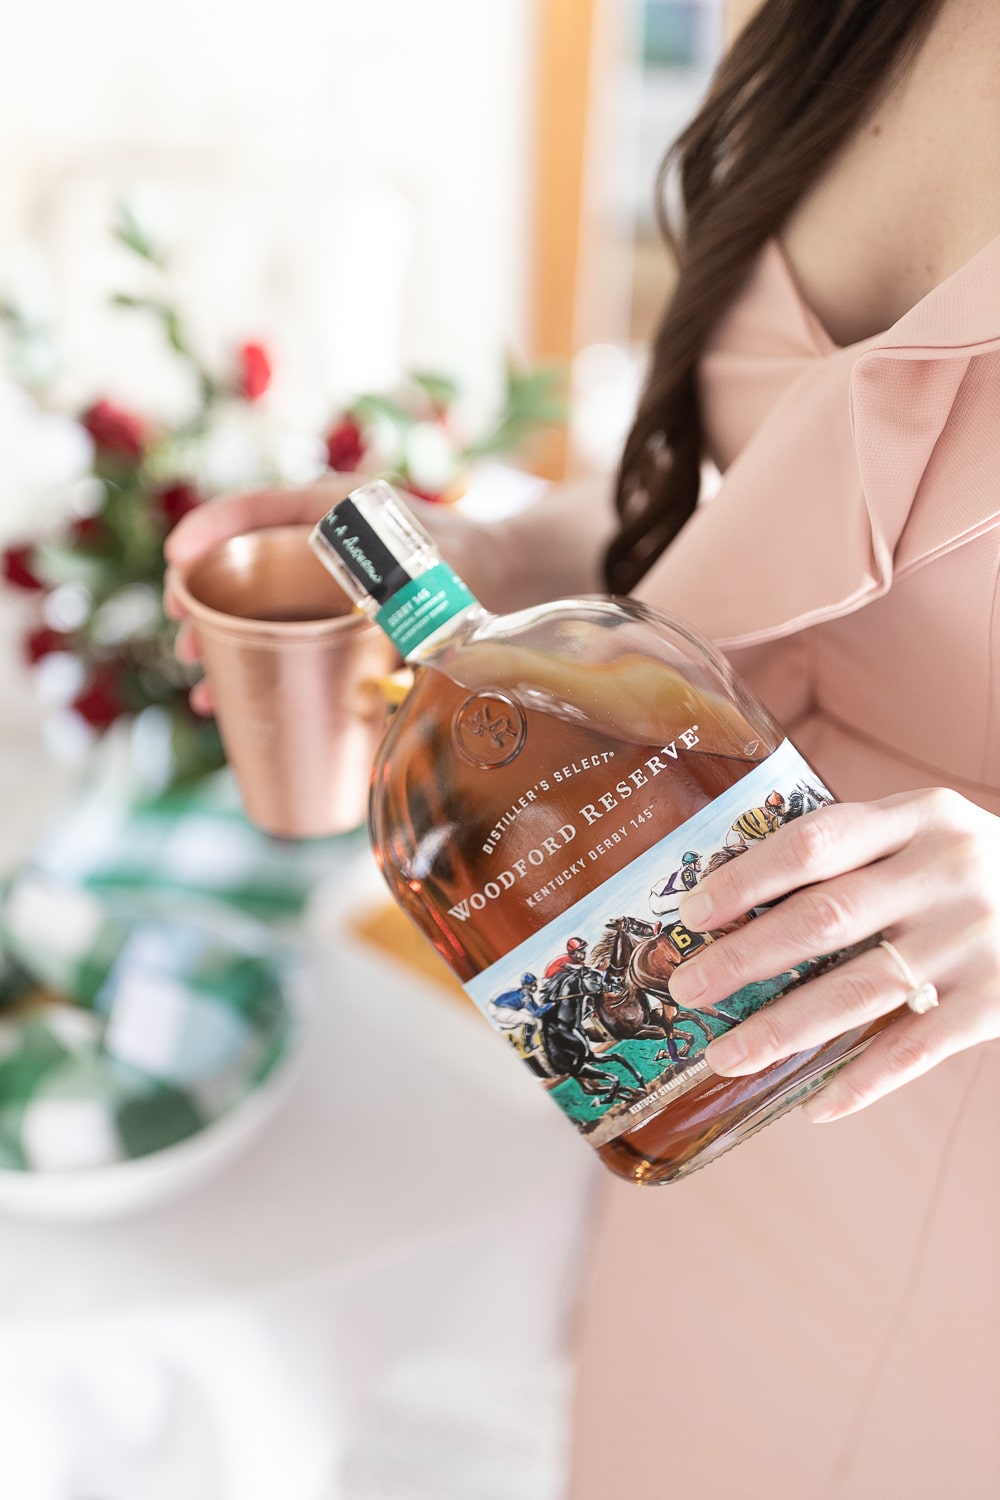 Blogger Stephanie Ziajka pours Woodford Reserve Special Edition Kentucky Derby bourbon whiskey into a copper julep cup on Diary of a Debutante